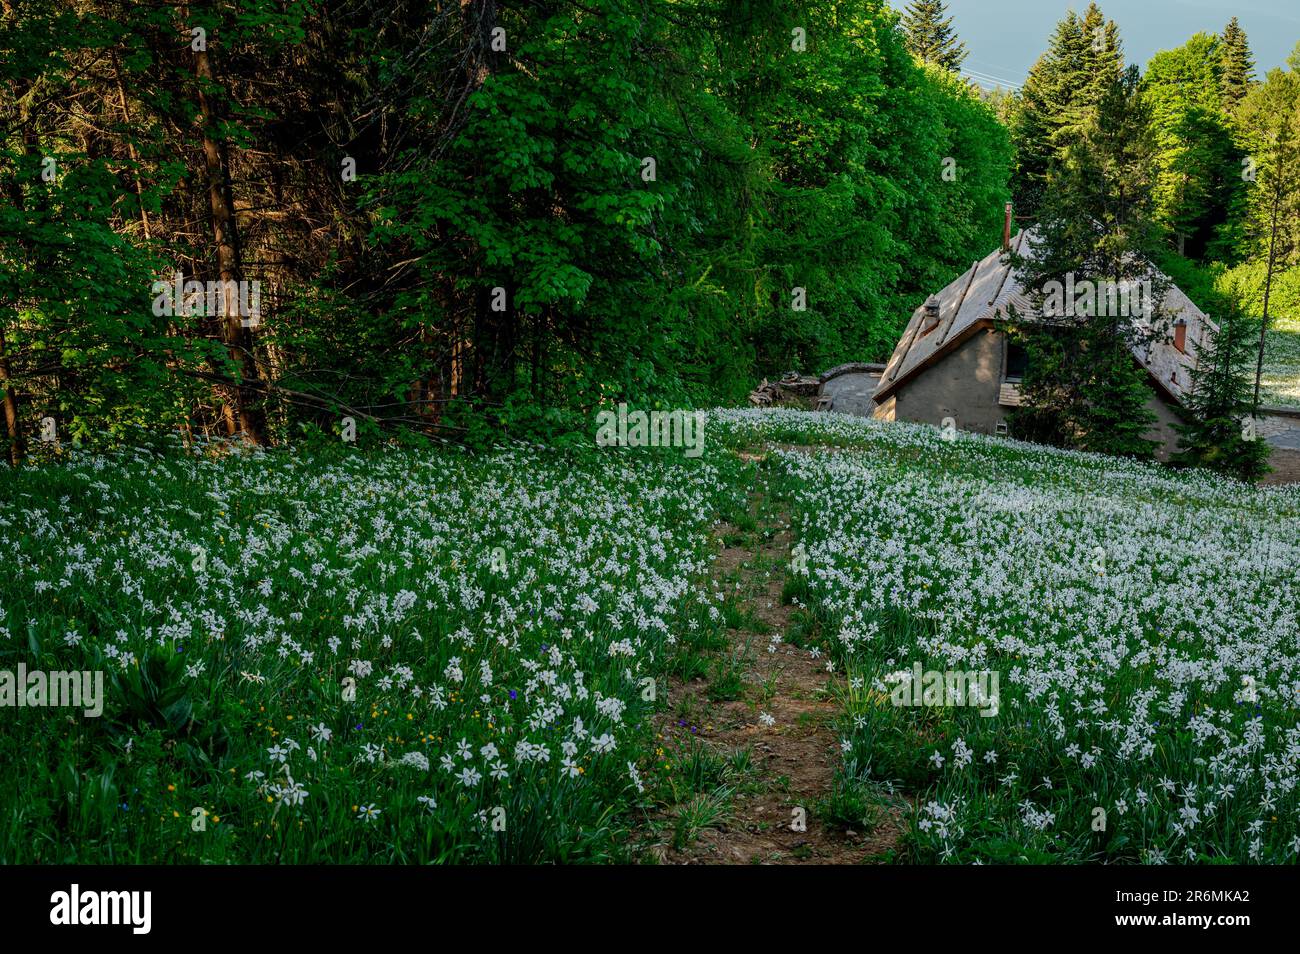 Landscape with mountains and sky. White Daffodils Blooming in spring. Narcissus poeticus. pheasant's eye. Montreux, Switzerland. Stock Photo